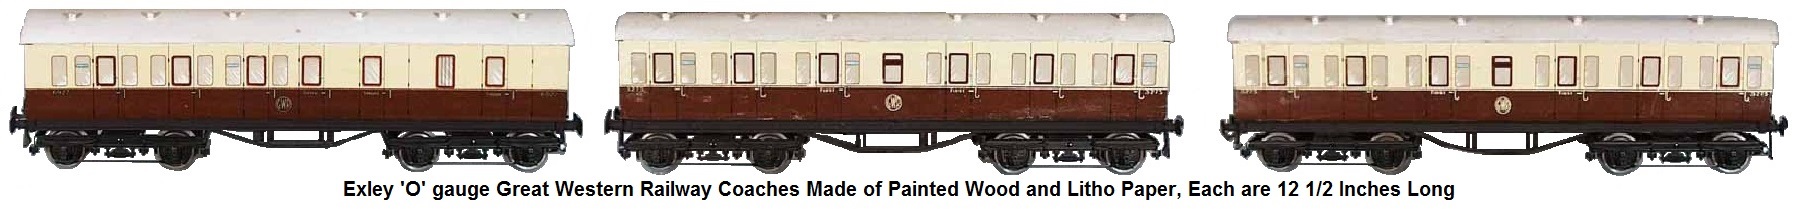 Exley Great Western Railway Coaches 'O' gauge, painted wood & litho paper, each are 12 1/2 inches long